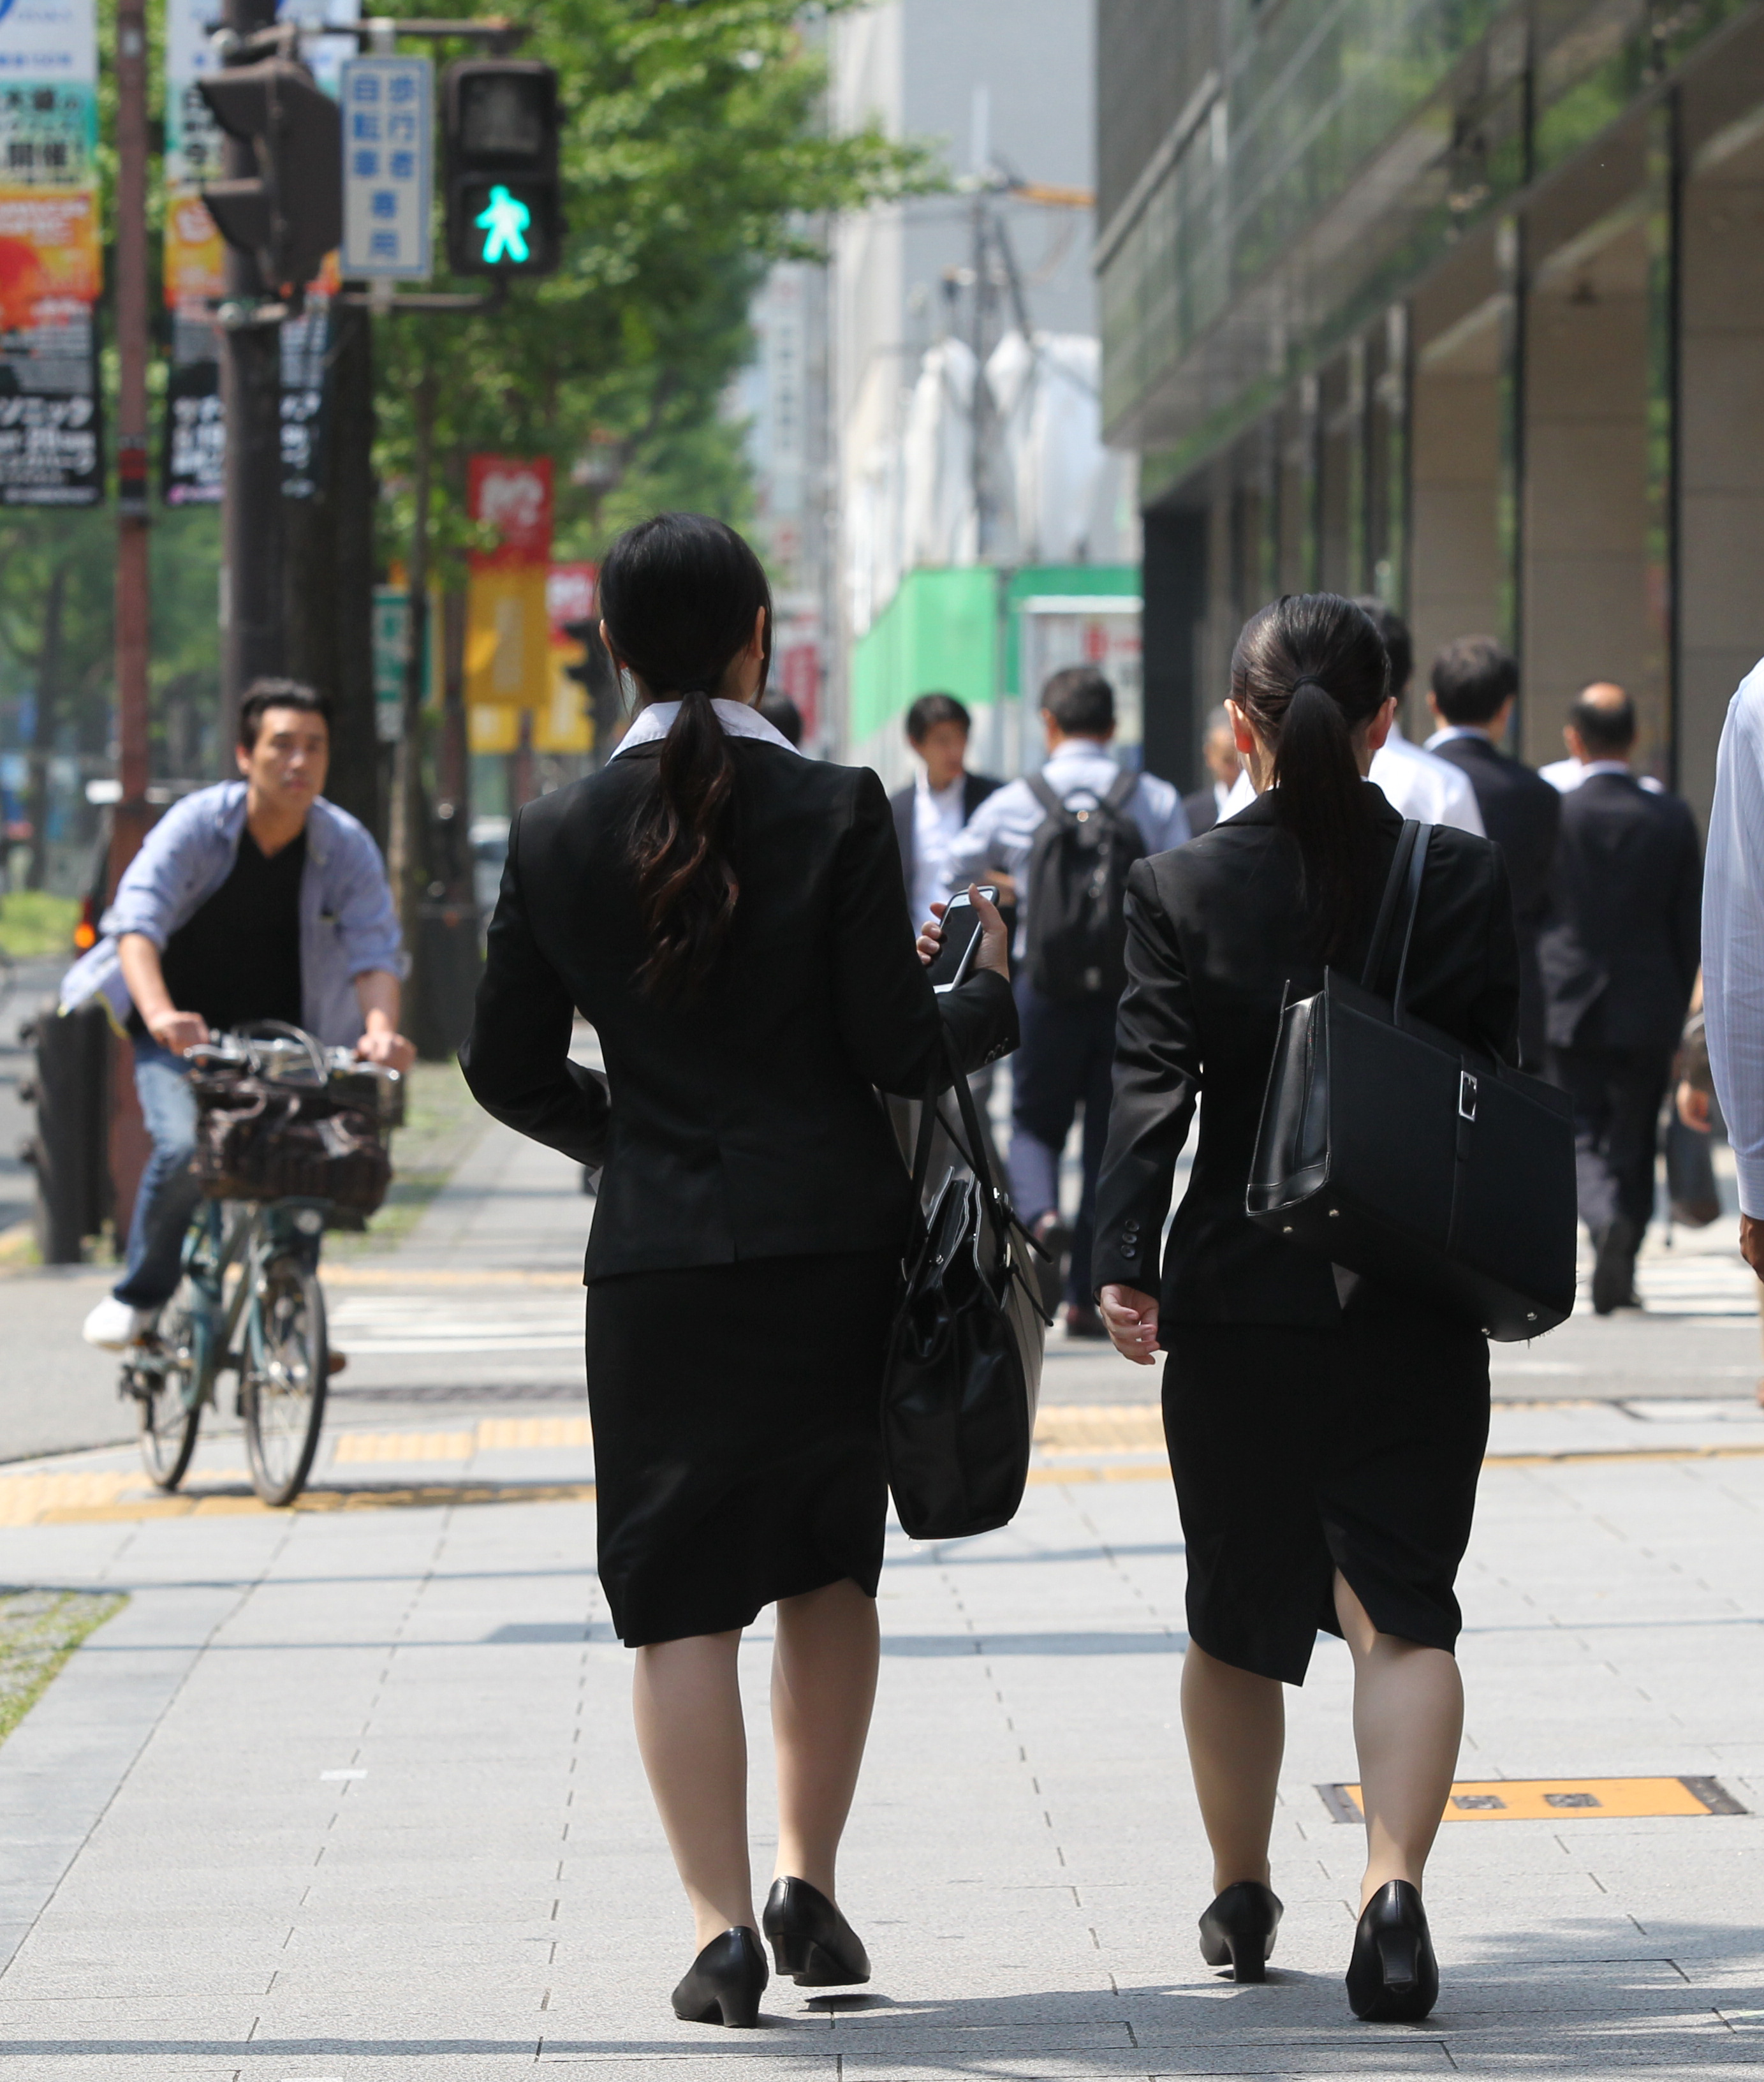 Women students wearing black suits